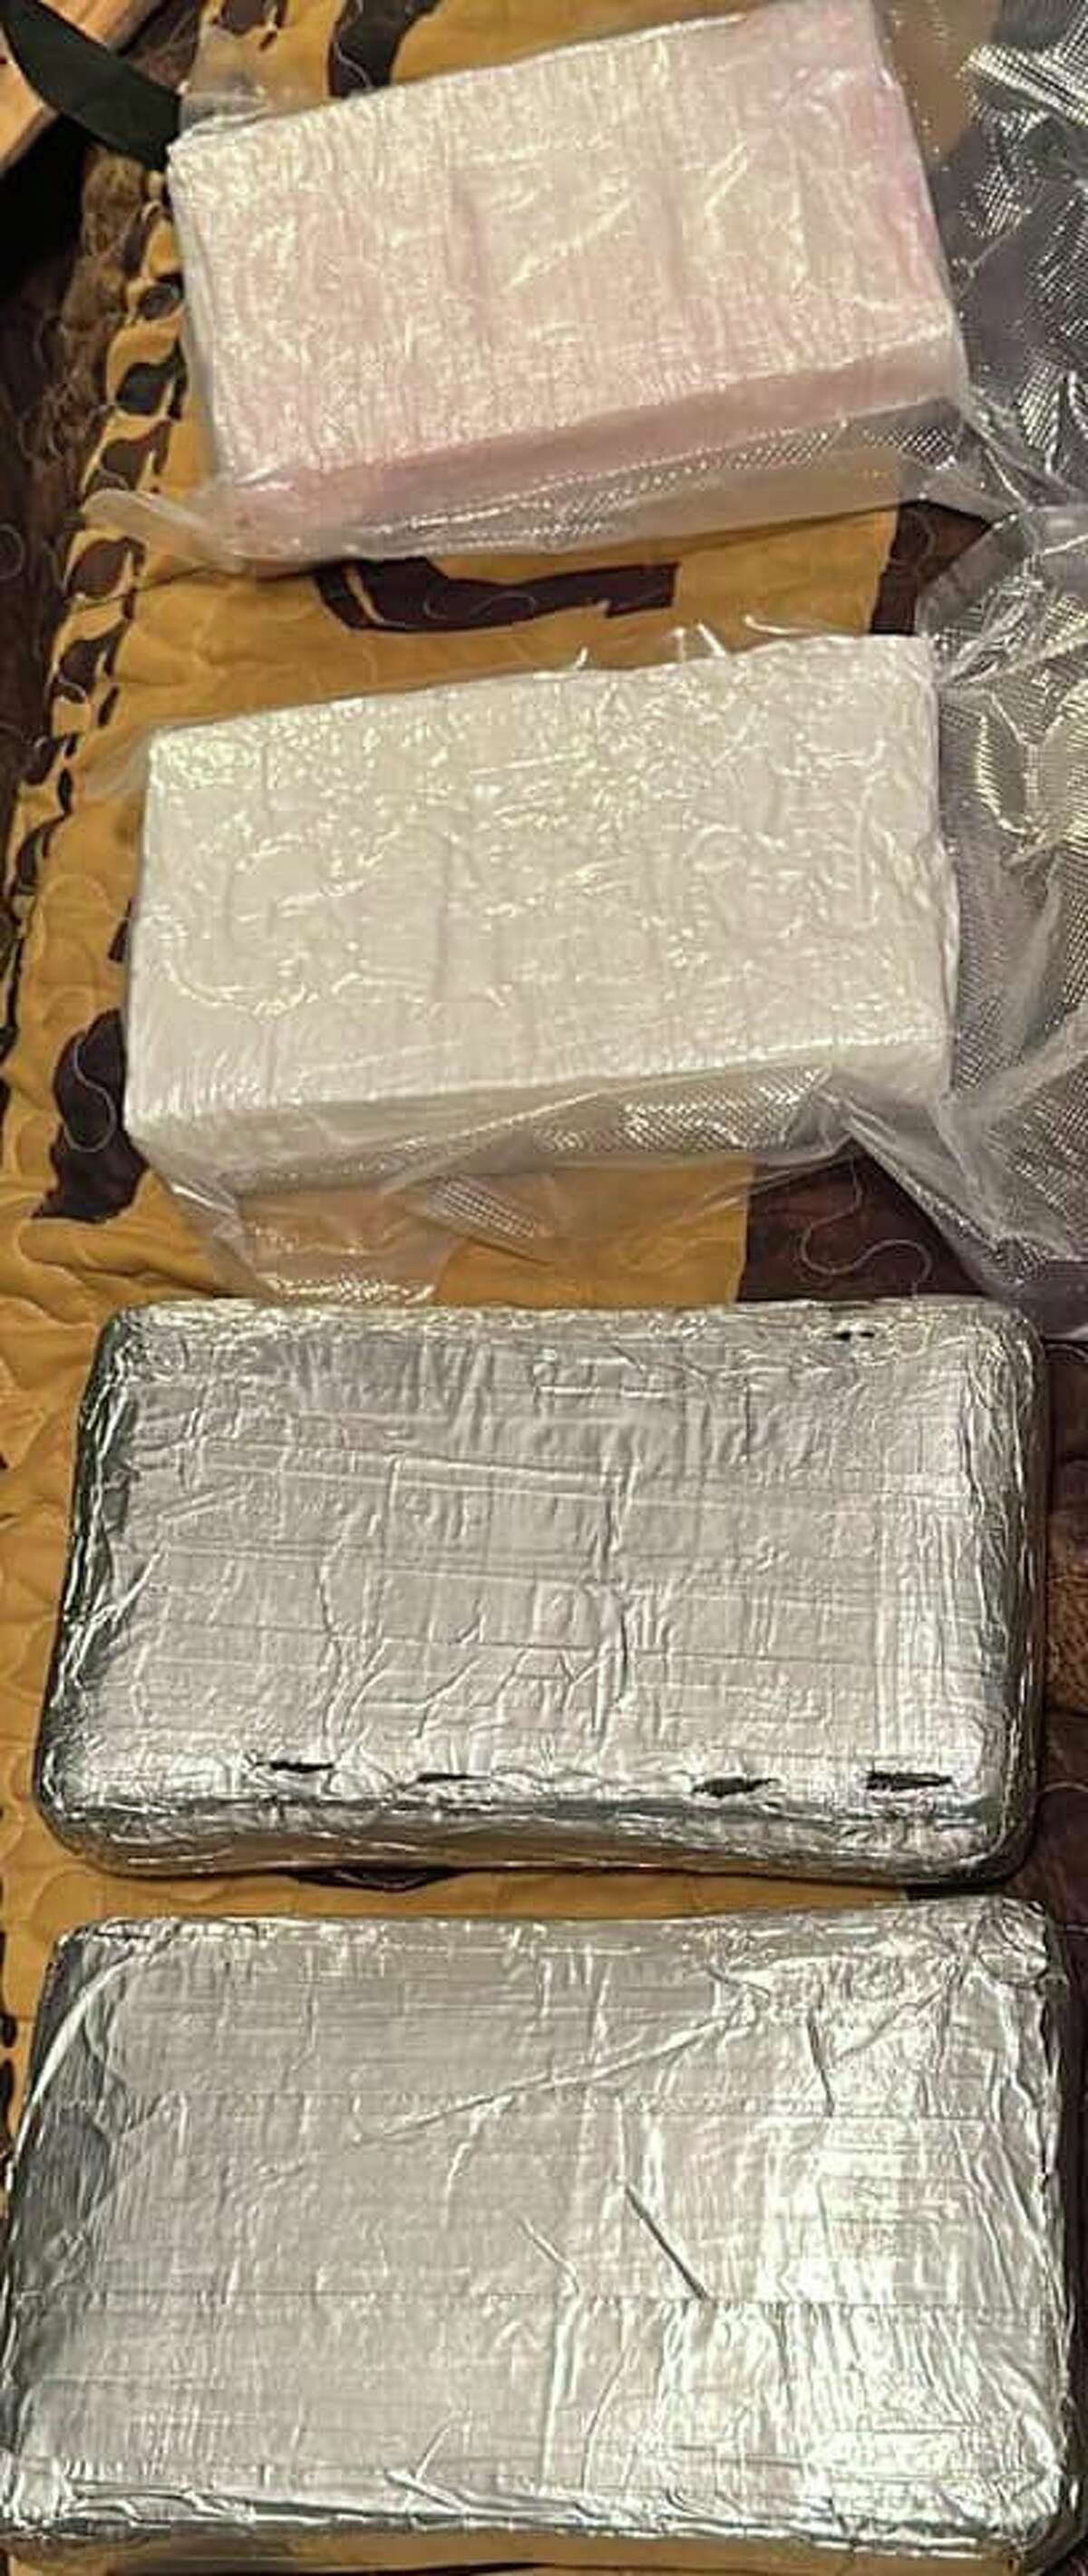 Webb County Precinct 2 Constable's Office deputies and U.S. Border Patrol agents said they seized these 10 pounds of cocaine from a home in the 100 block of Soledad Loop in the Villa del Sol Subdivision.